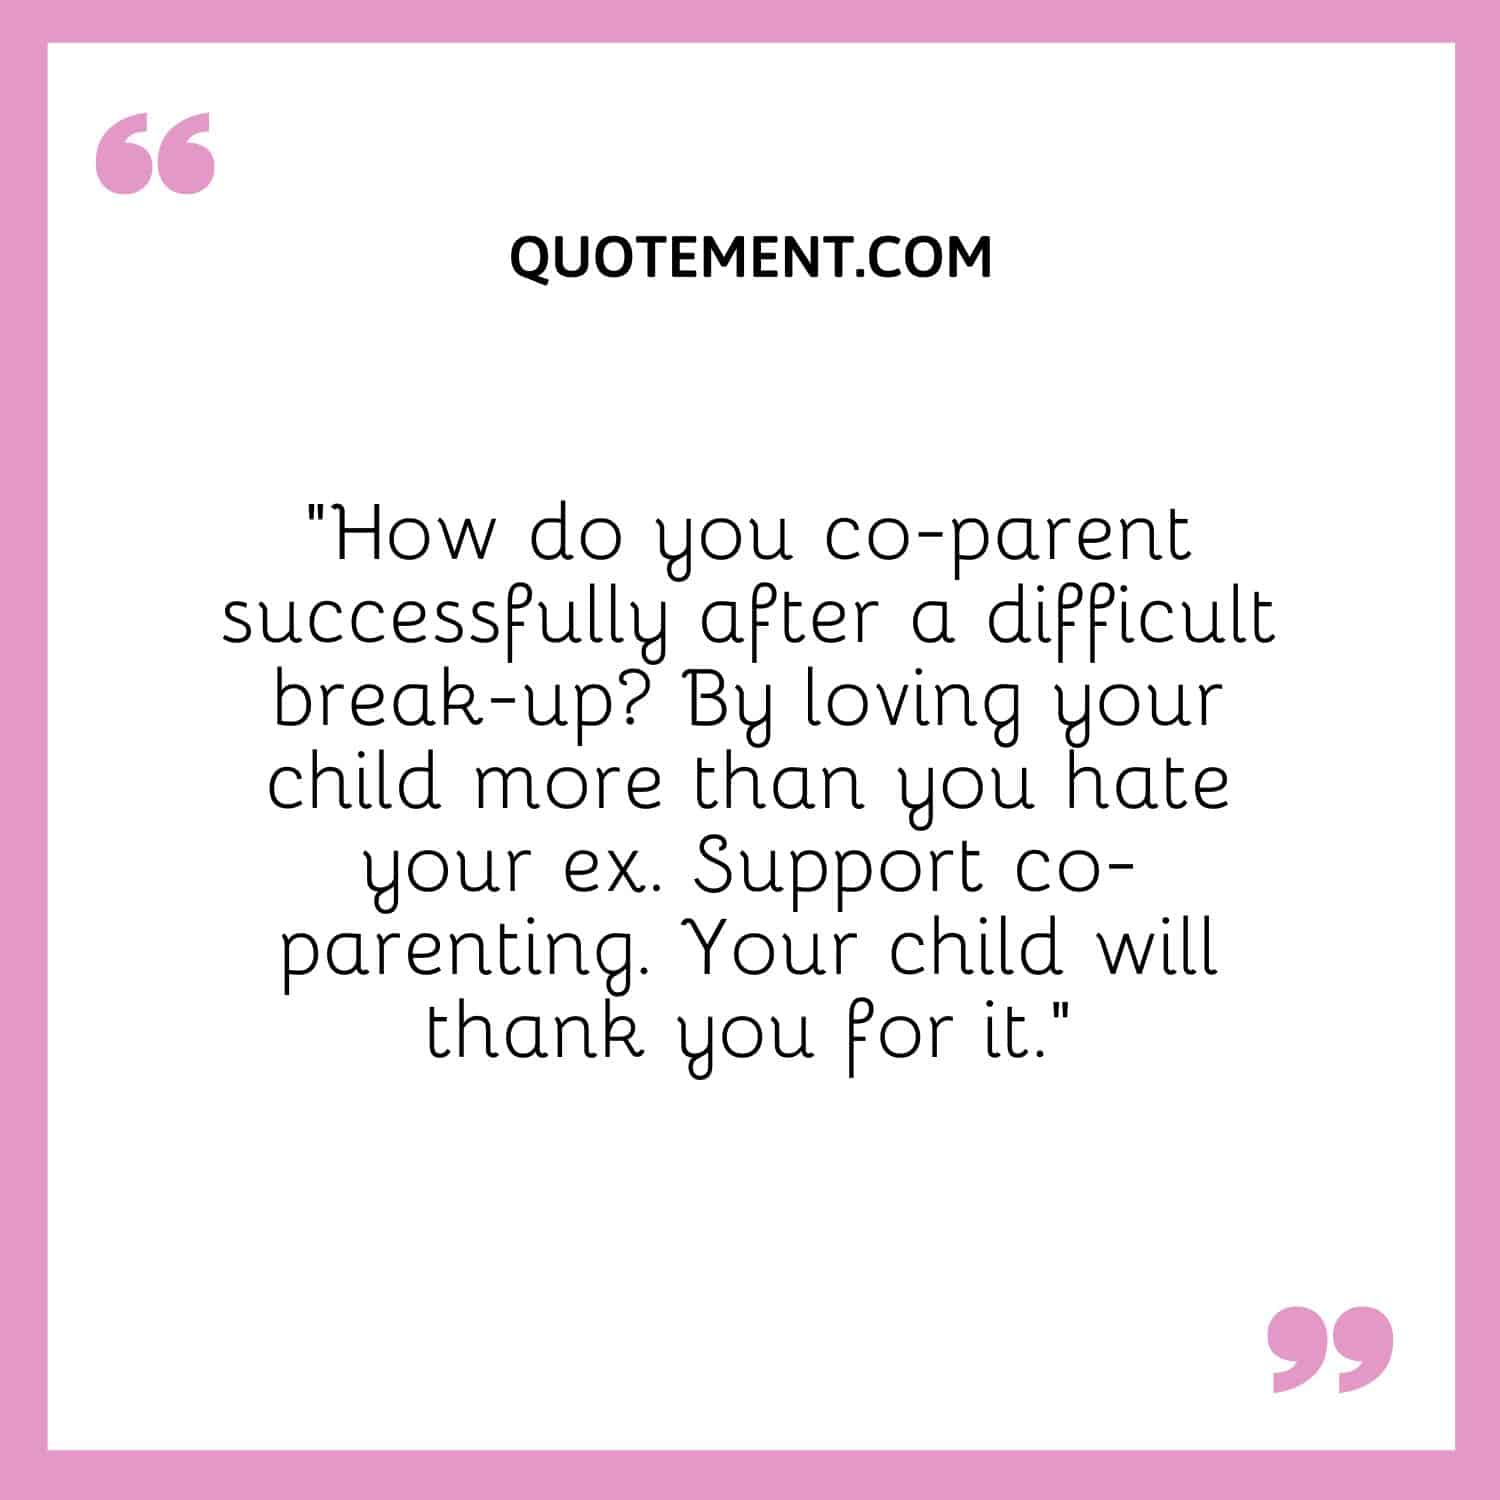 How do you co-parent successfully after a difficult break-up